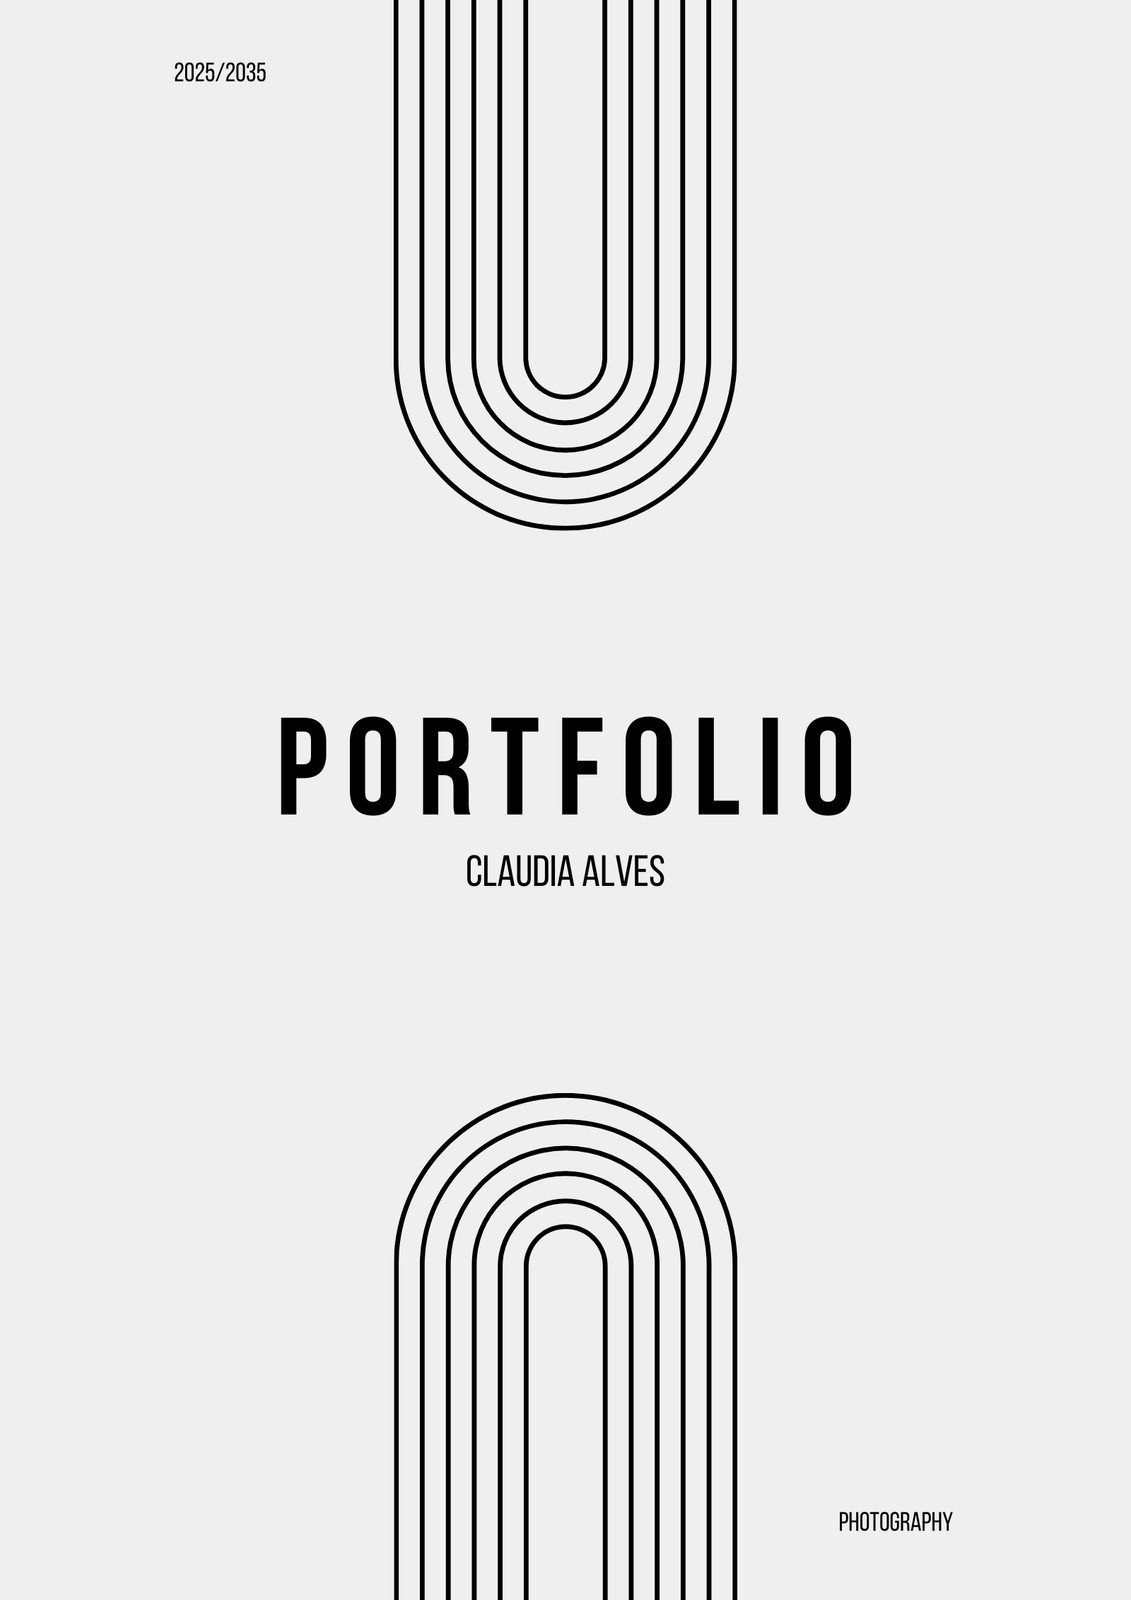 Grey and Black Abstract Basic Minimalist Simple Classic Project Portfolio Cover A4 Document